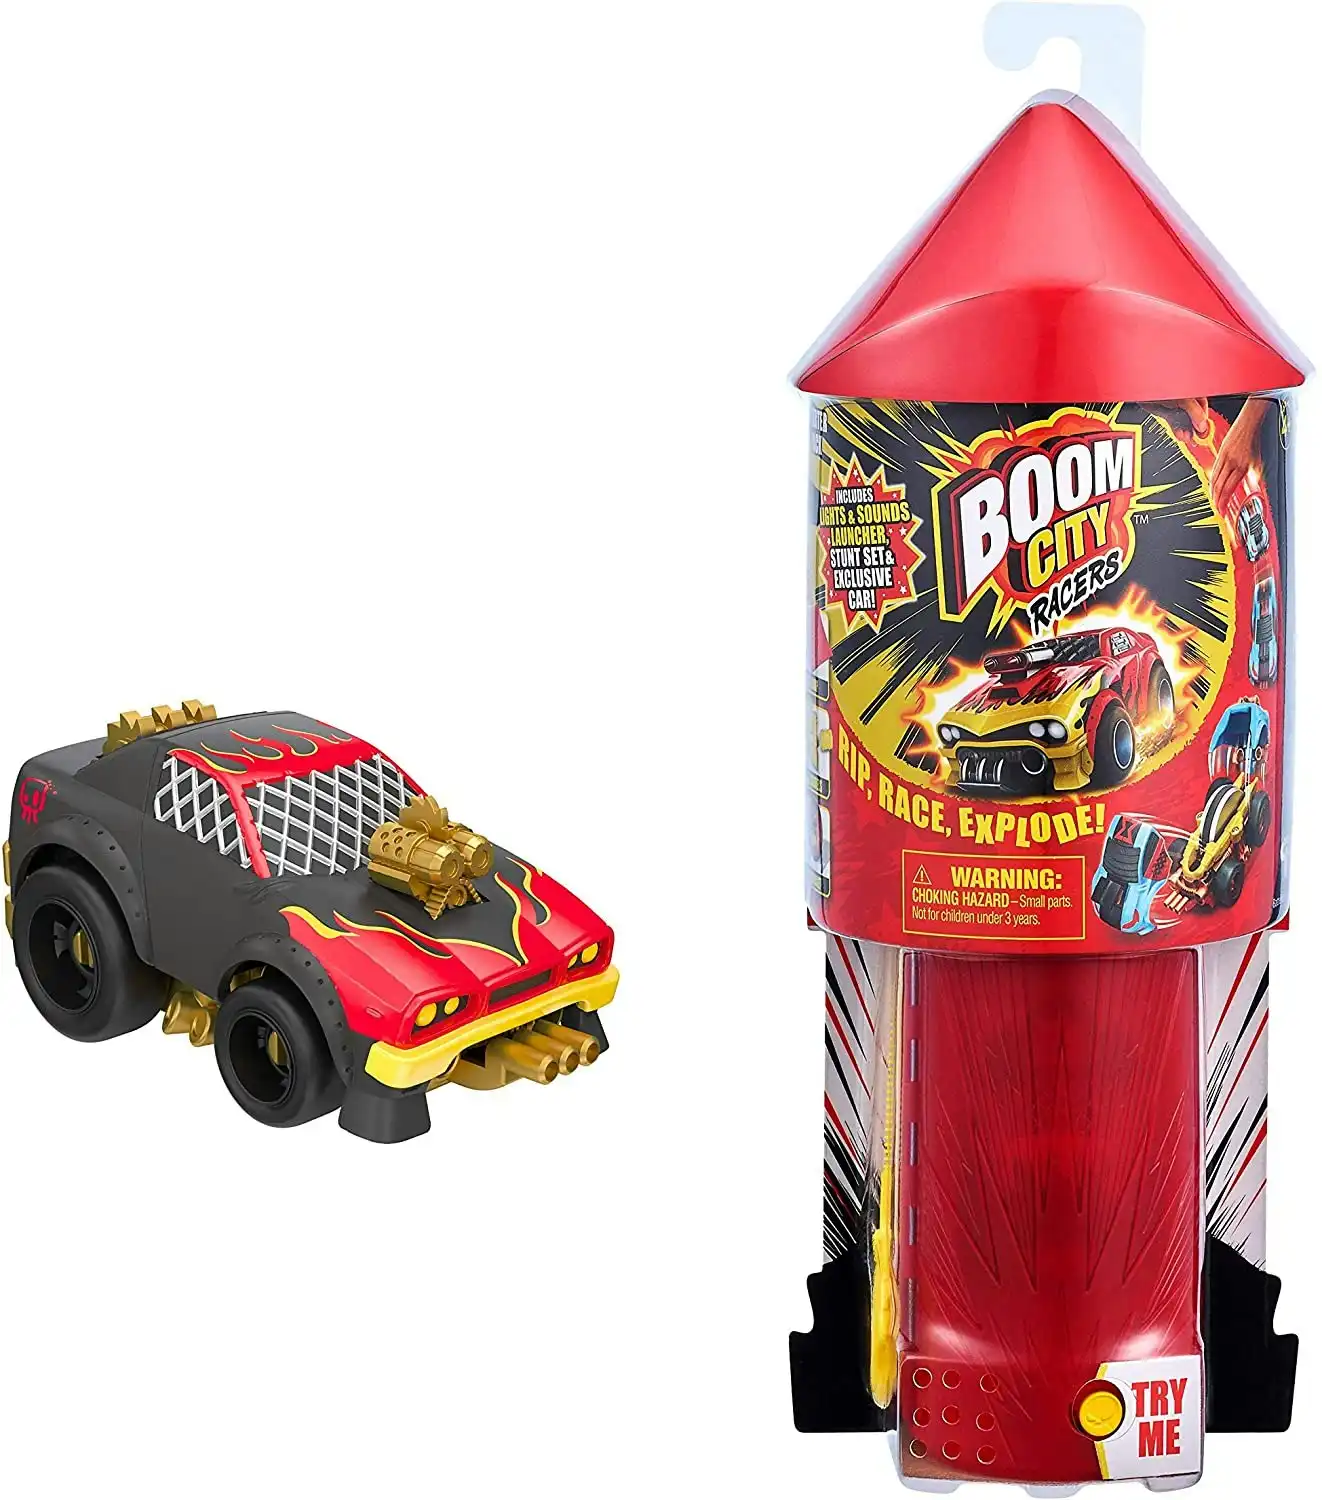 Boom City Racers - Starter Pack - Rip Race And Explode On Impact